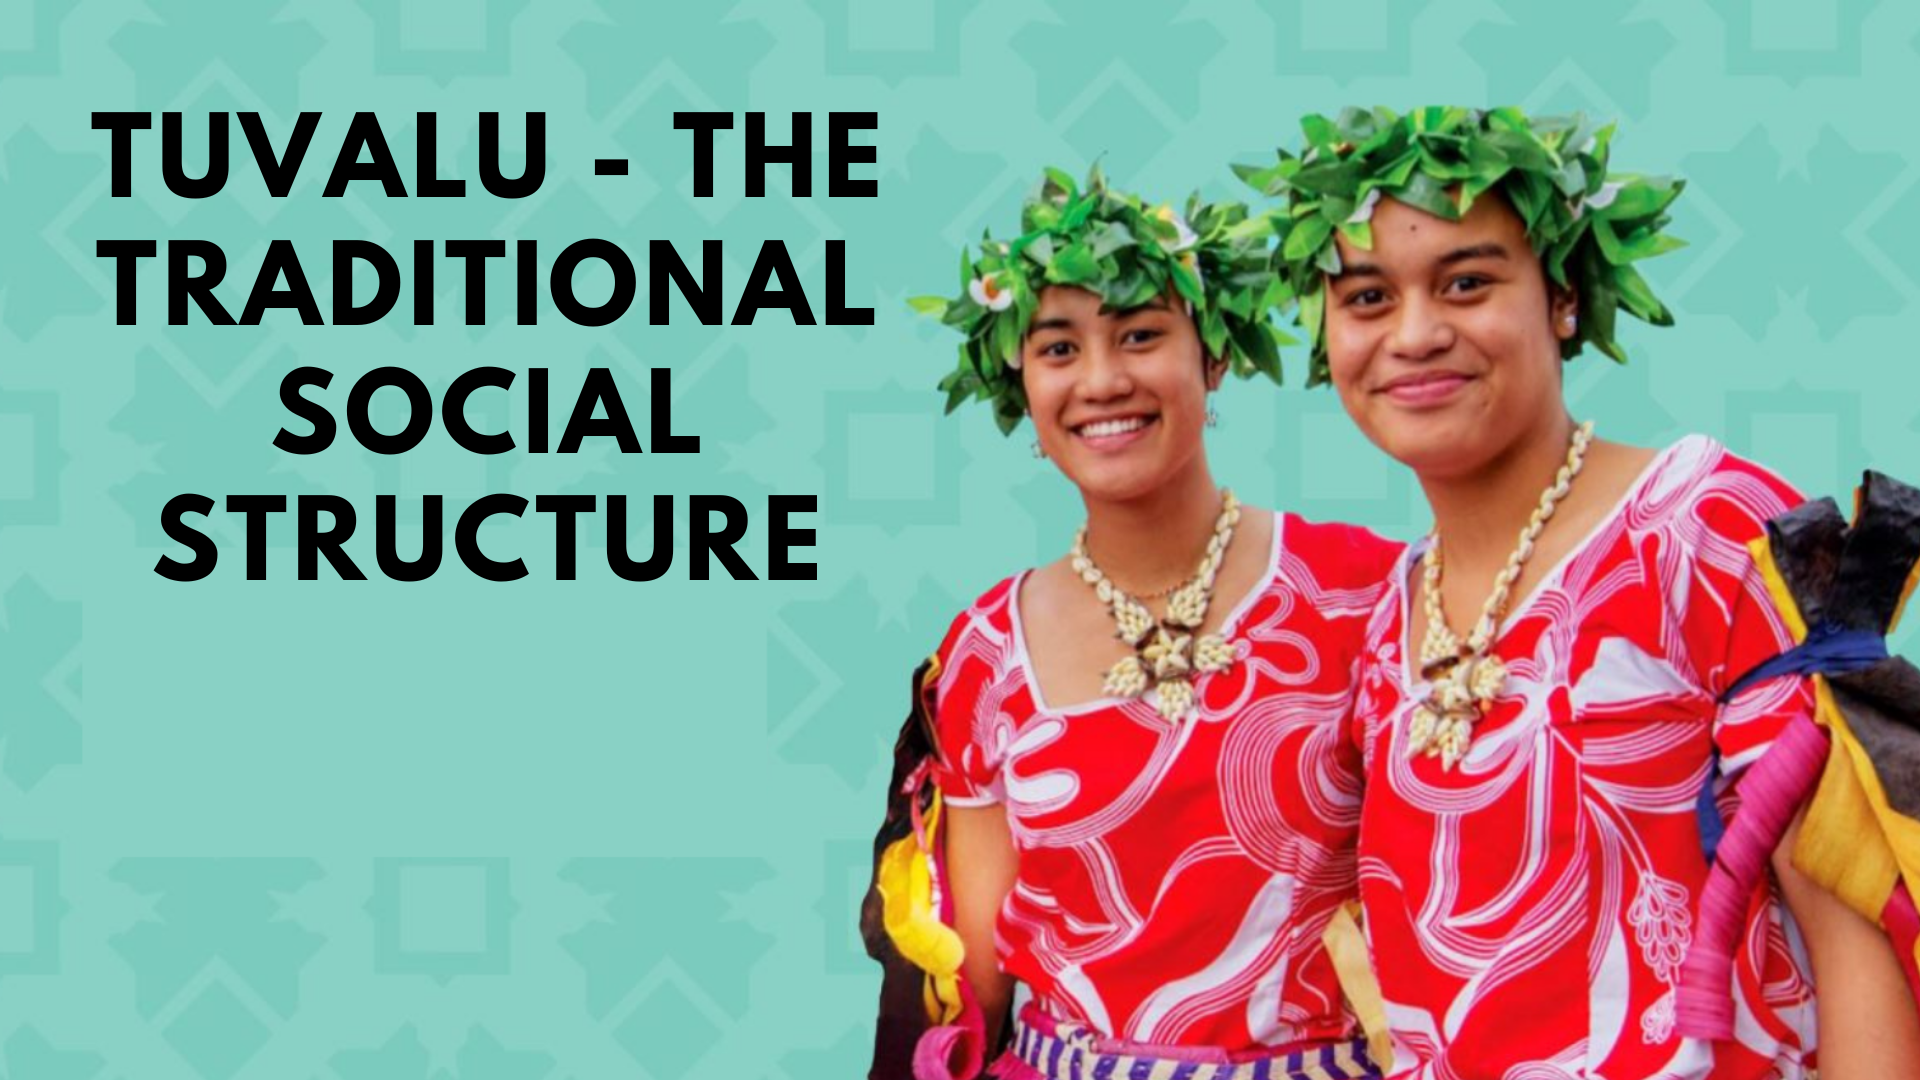 Tuvalu - The Traditional Social Structure